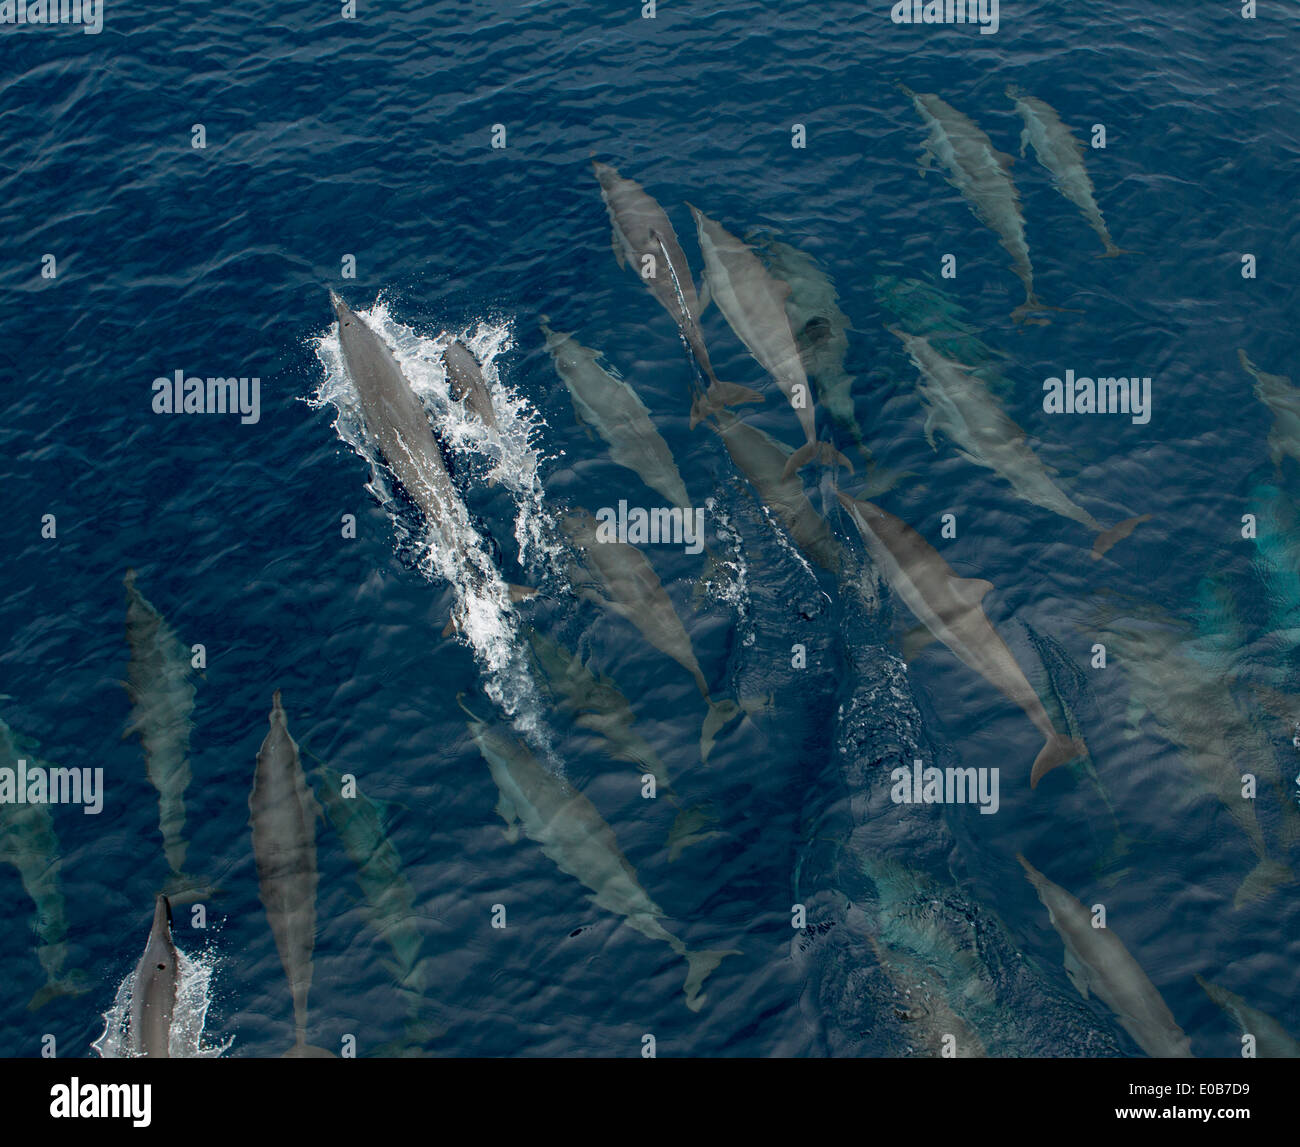 Common dolphins at surface. Stock Photo